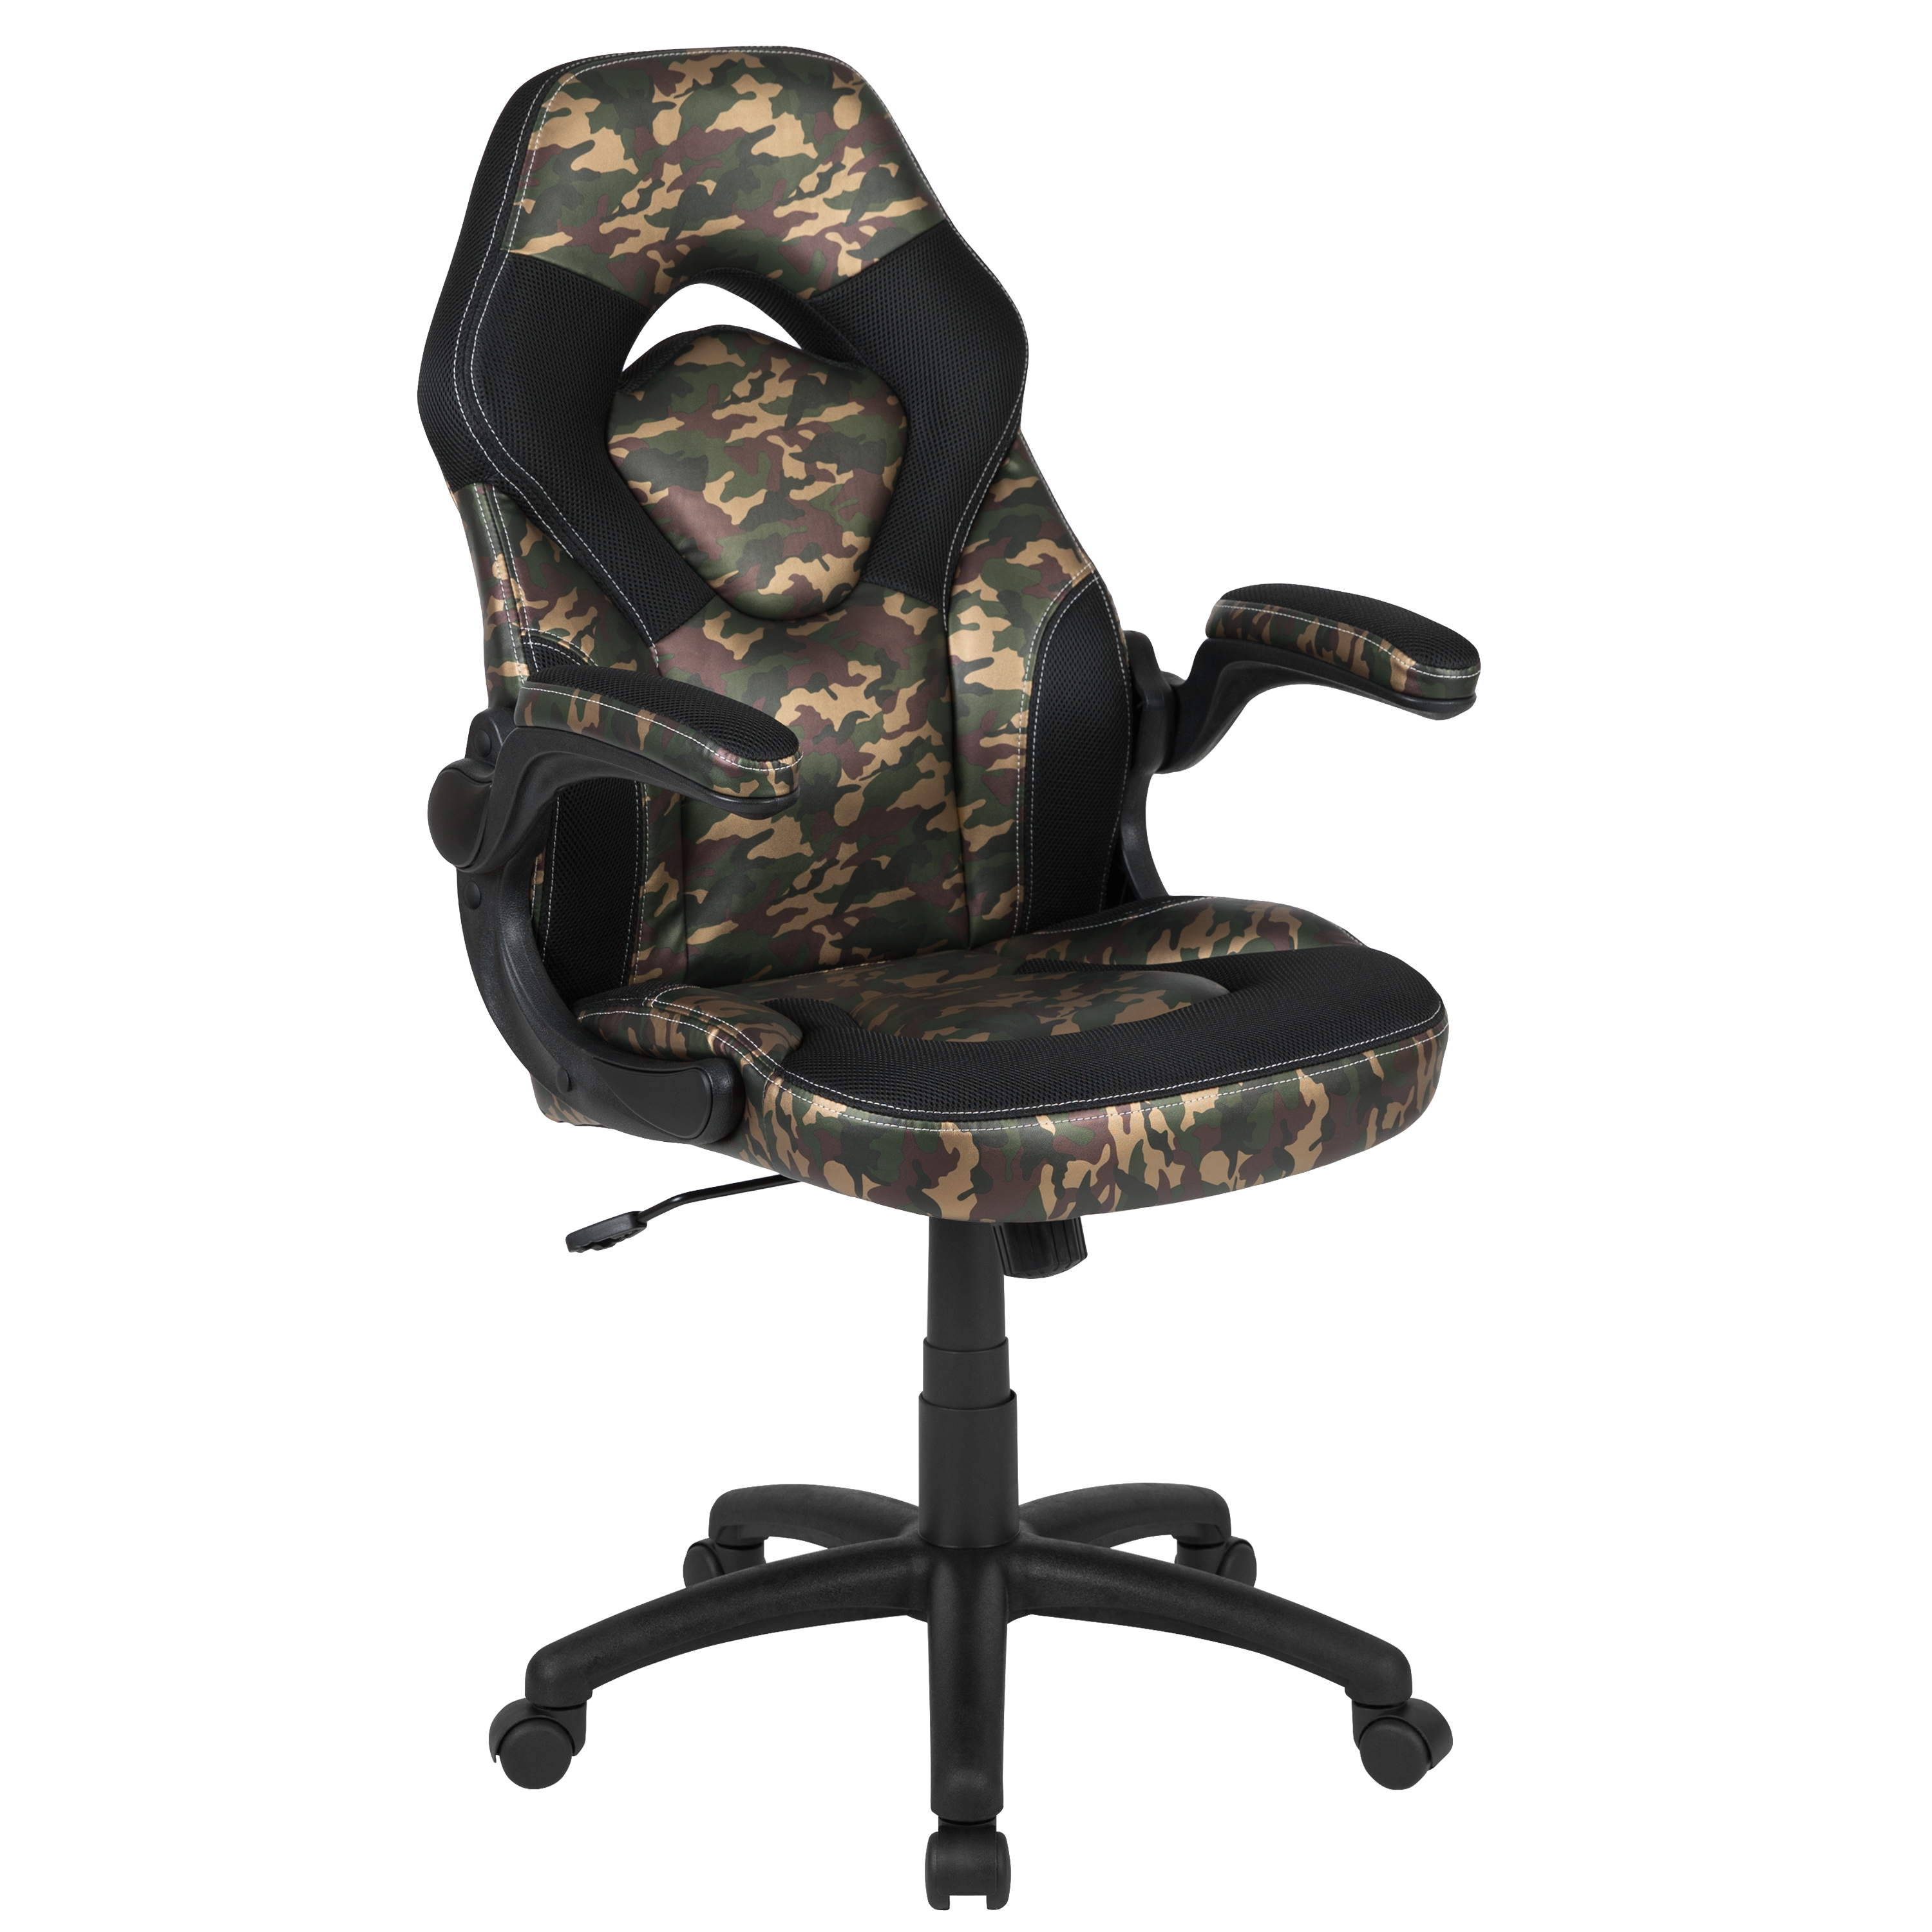 Flash Furniture CH-00095-CAM-GG X10 Camouflage/Black LeatherSoft Gaming / Racing Office Ergonomic Swivel Chair with Flip-up Arms